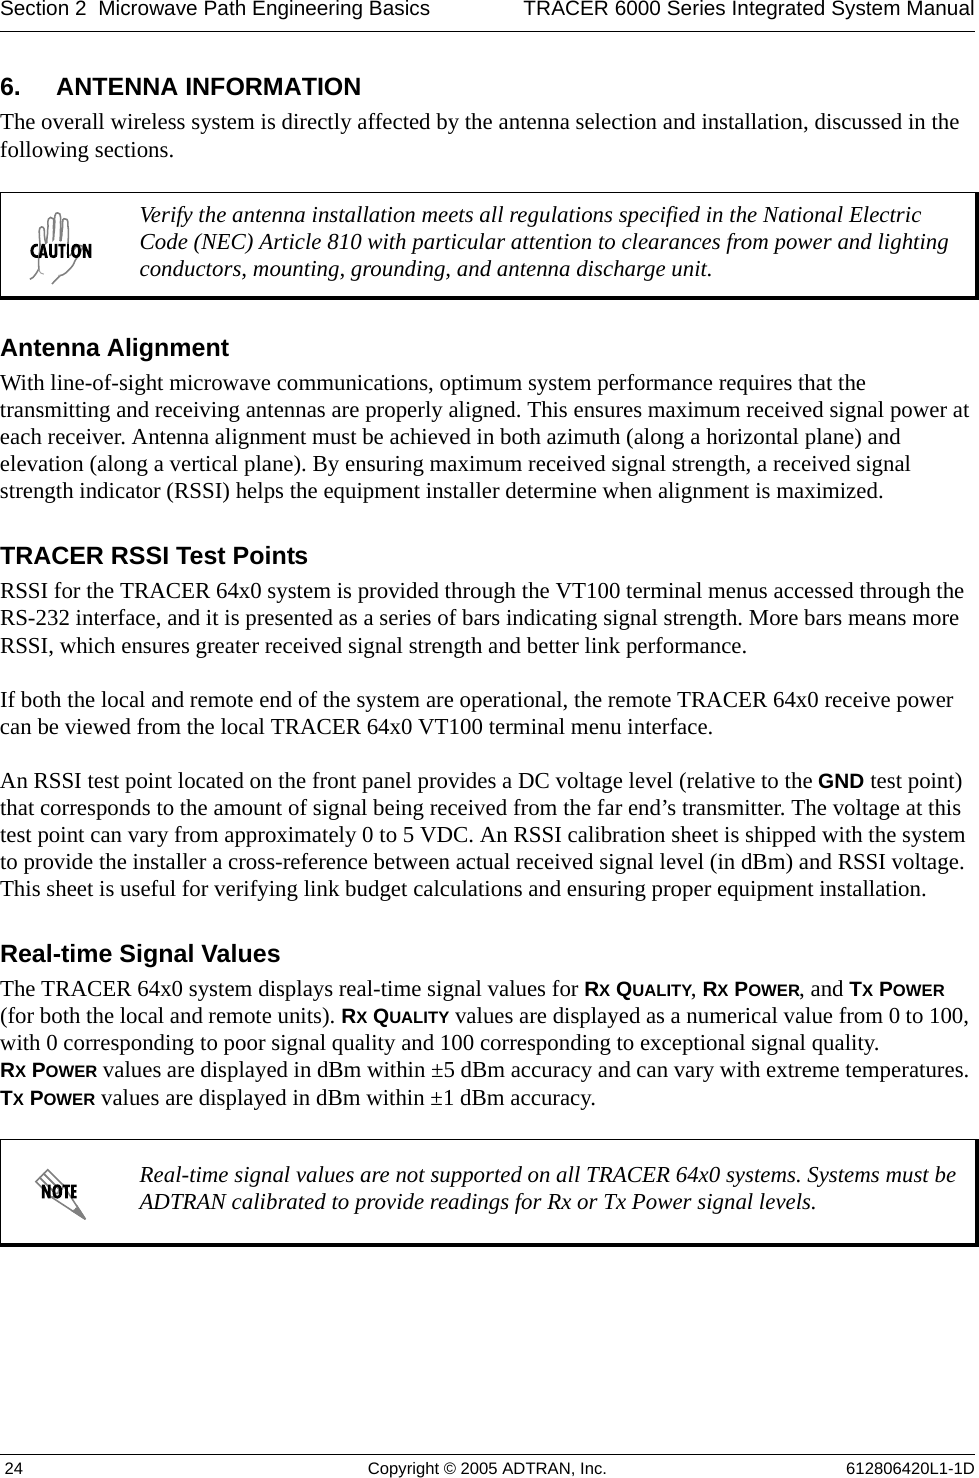 Section 2  Microwave Path Engineering Basics TRACER 6000 Series Integrated System Manual 24 Copyright © 2005 ADTRAN, Inc. 612806420L1-1D6. ANTENNA INFORMATIONThe overall wireless system is directly affected by the antenna selection and installation, discussed in the following sections.Antenna AlignmentWith line-of-sight microwave communications, optimum system performance requires that the transmitting and receiving antennas are properly aligned. This ensures maximum received signal power at each receiver. Antenna alignment must be achieved in both azimuth (along a horizontal plane) and elevation (along a vertical plane). By ensuring maximum received signal strength, a received signal strength indicator (RSSI) helps the equipment installer determine when alignment is maximized. TRACER RSSI Test PointsRSSI for the TRACER 64x0 system is provided through the VT100 terminal menus accessed through the RS-232 interface, and it is presented as a series of bars indicating signal strength. More bars means more RSSI, which ensures greater received signal strength and better link performance.If both the local and remote end of the system are operational, the remote TRACER 64x0 receive power can be viewed from the local TRACER 64x0 VT100 terminal menu interface.An RSSI test point located on the front panel provides a DC voltage level (relative to the GND test point) that corresponds to the amount of signal being received from the far end’s transmitter. The voltage at this test point can vary from approximately 0 to 5 VDC. An RSSI calibration sheet is shipped with the system to provide the installer a cross-reference between actual received signal level (in dBm) and RSSI voltage. This sheet is useful for verifying link budget calculations and ensuring proper equipment installation.Real-time Signal ValuesThe TRACER 64x0 system displays real-time signal values for RX QUALITY, RX POWER, and TX POWER (for both the local and remote units). RX QUALITY values are displayed as a numerical value from 0 to 100, with 0 corresponding to poor signal quality and 100 corresponding to exceptional signal quality. RX POWER values are displayed in dBm within ±5 dBm accuracy and can vary with extreme temperatures. TX POWER values are displayed in dBm within ±1 dBm accuracy. Verify the antenna installation meets all regulations specified in the National Electric Code (NEC) Article 810 with particular attention to clearances from power and lighting conductors, mounting, grounding, and antenna discharge unit.Real-time signal values are not supported on all TRACER 64x0 systems. Systems must be ADTRAN calibrated to provide readings for Rx or Tx Power signal levels. 